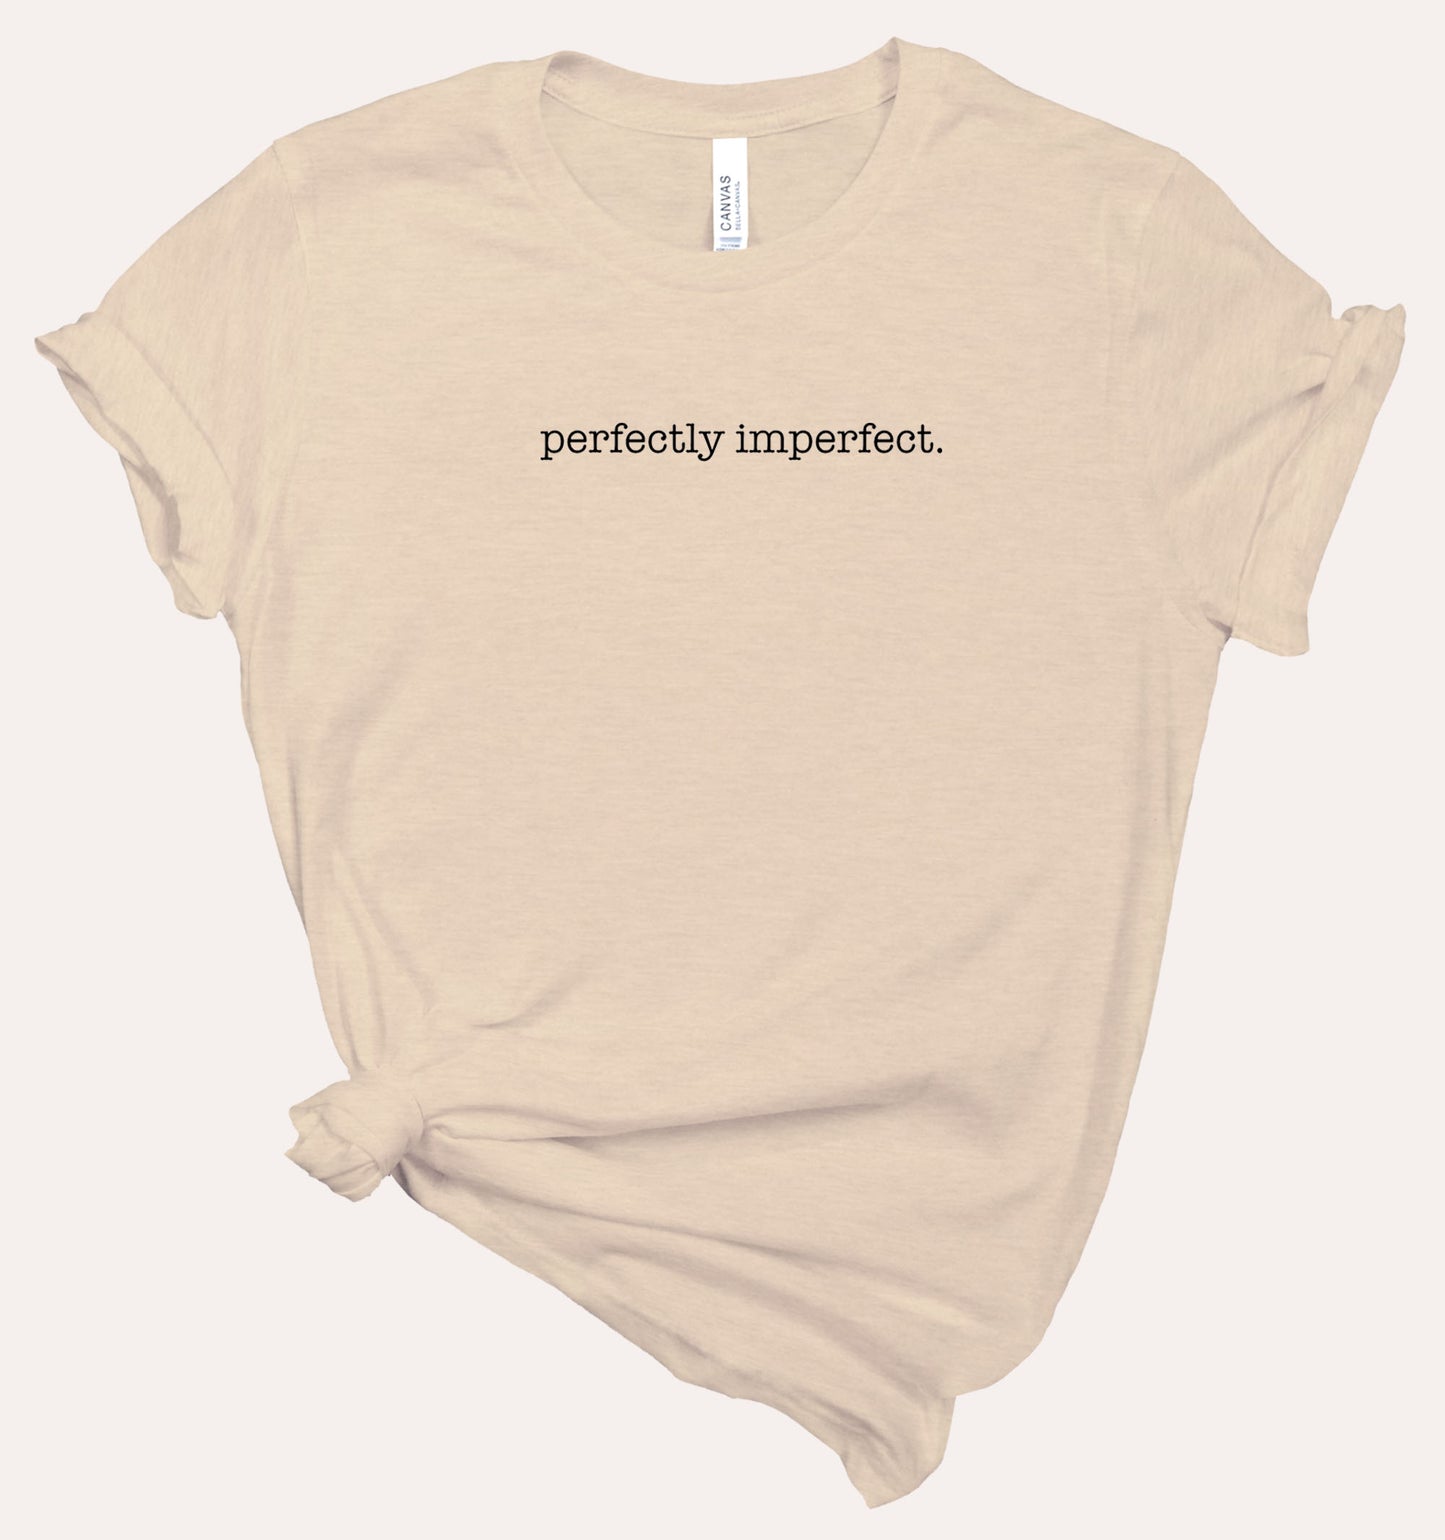 perfectly imperfect - Affirmation T-Shirt